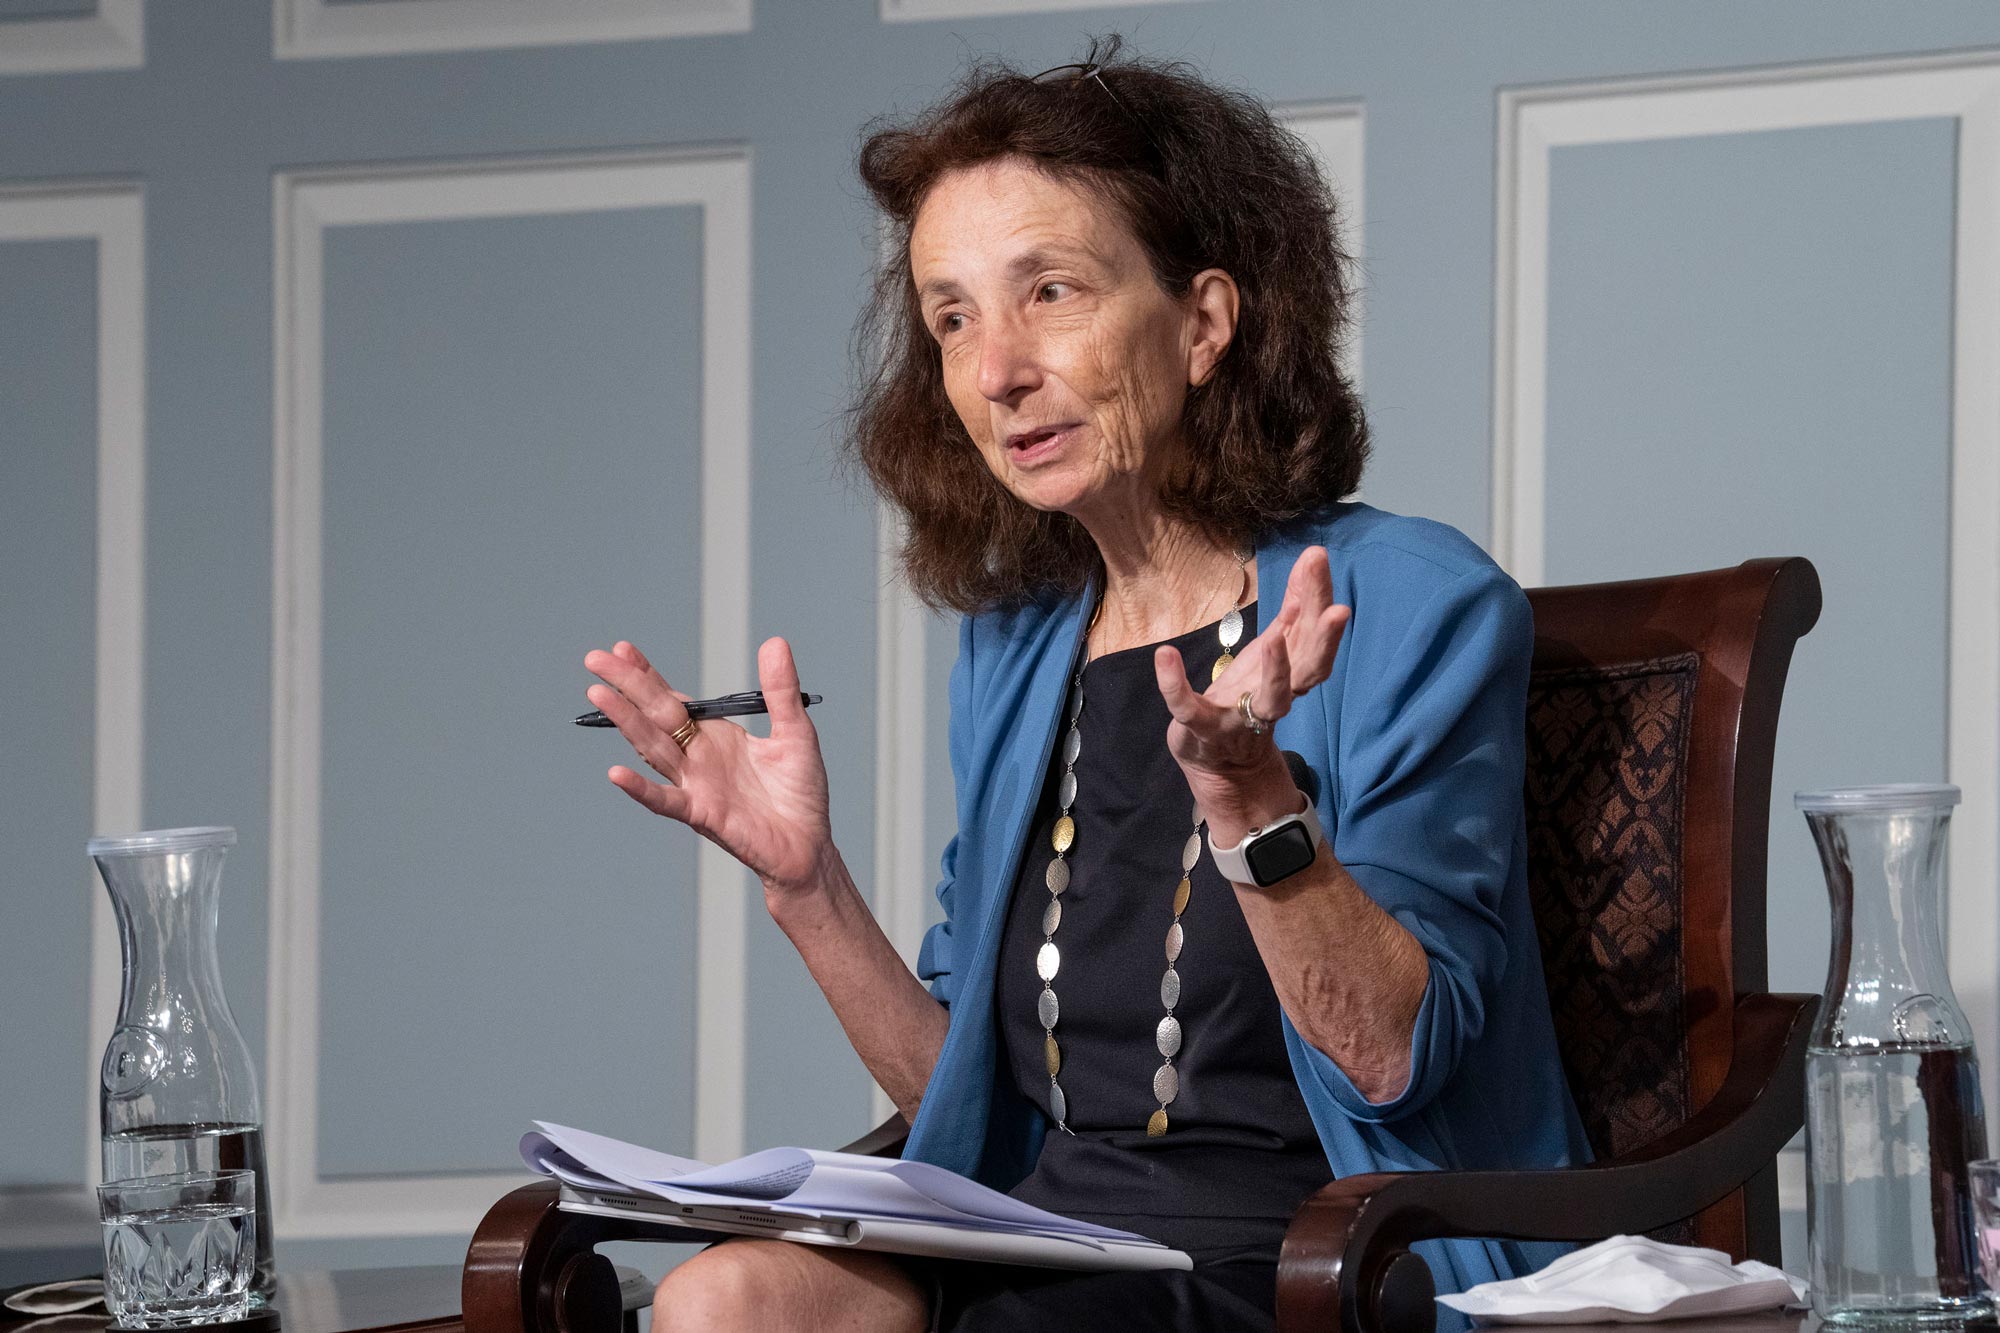 Naomi Cahn gestures with open hands while talking